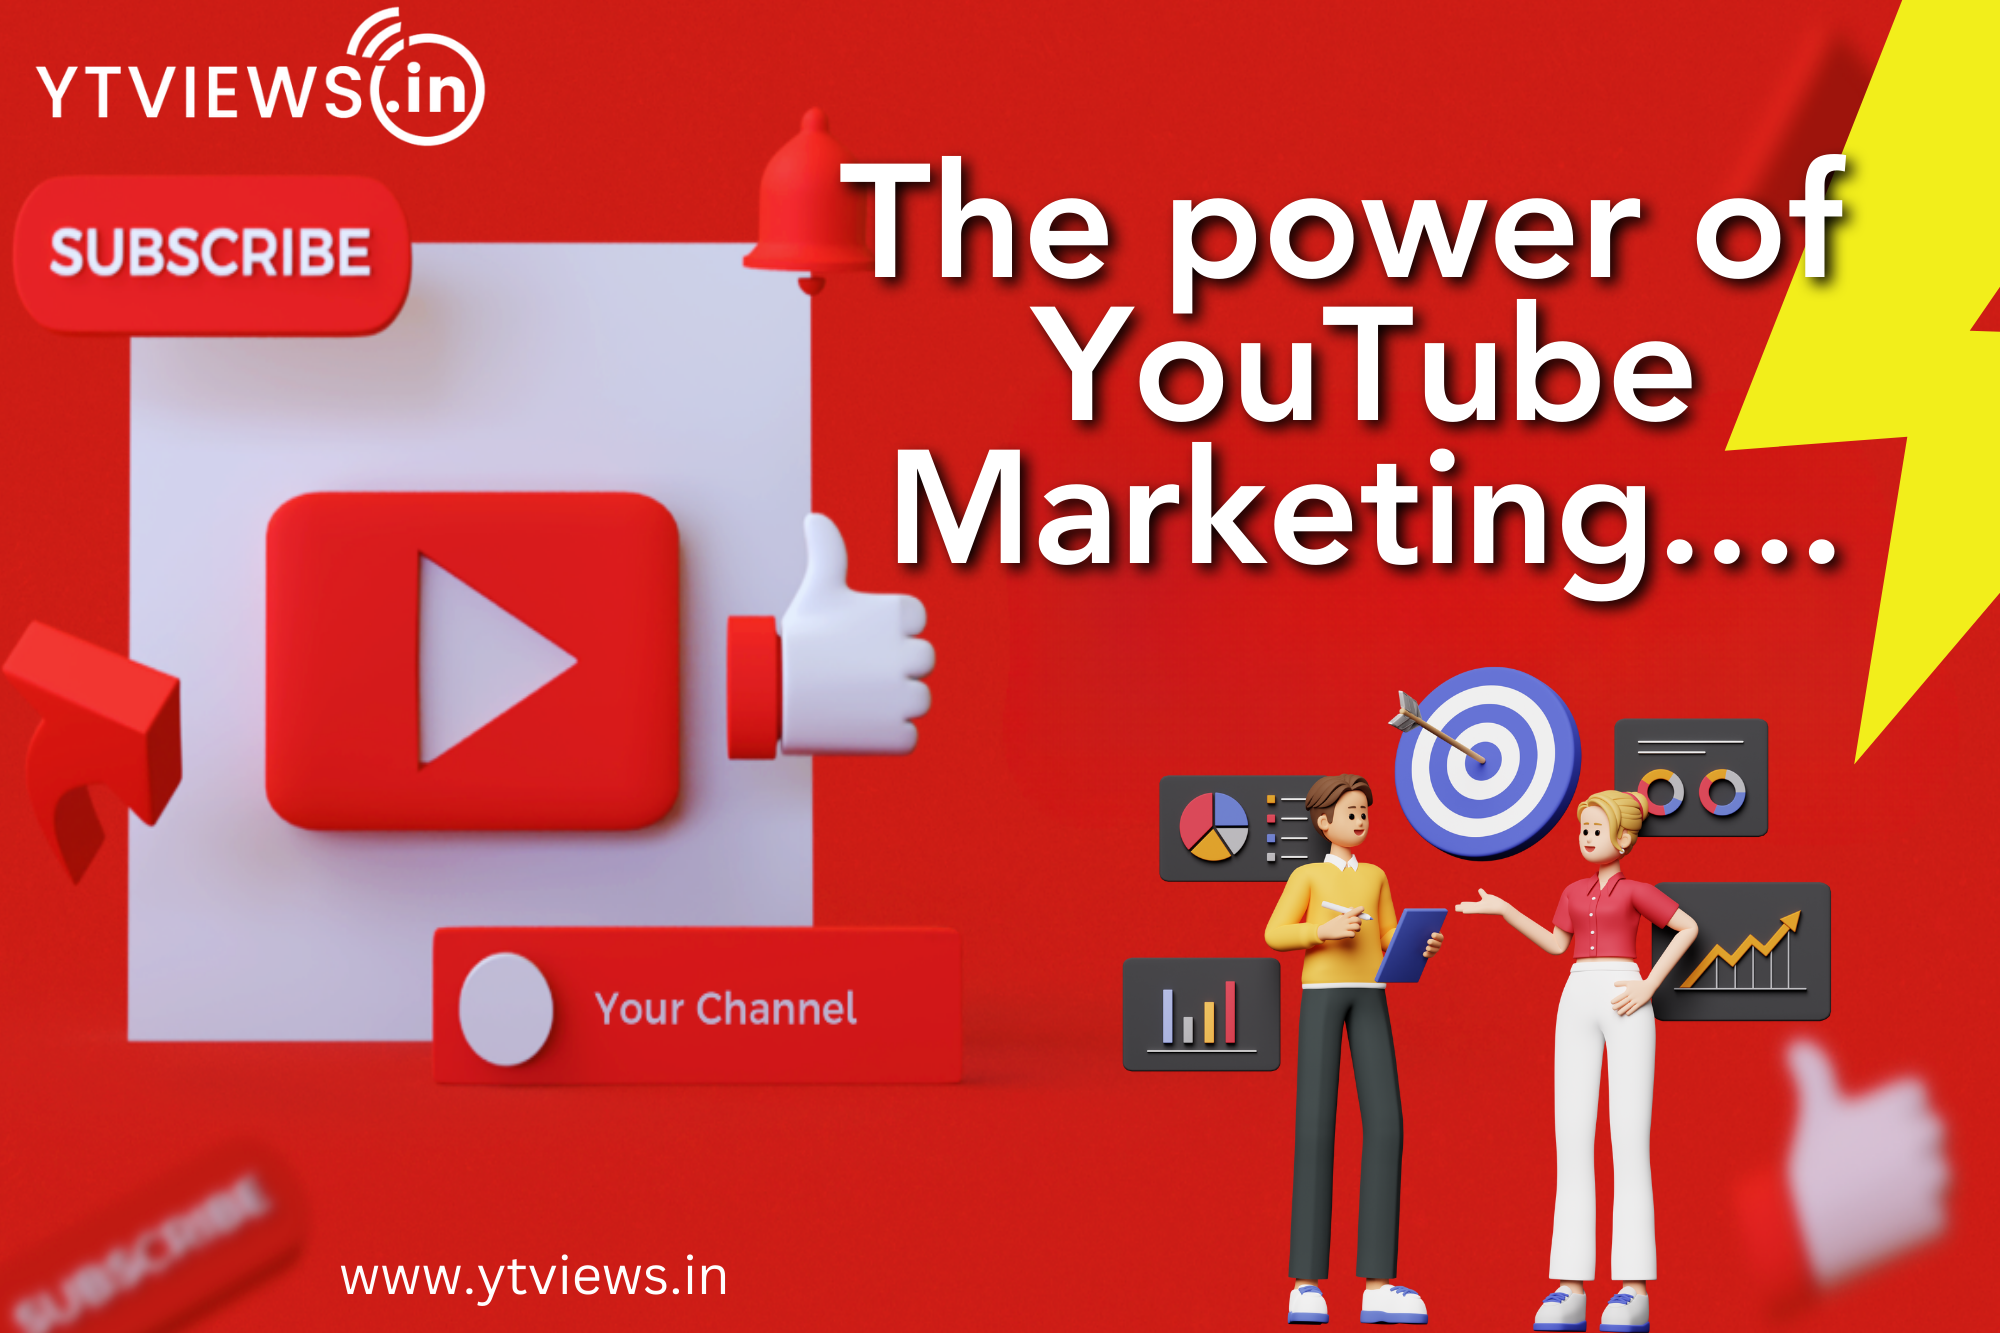 Can YouTube marketing unlock Google’s discovery power?